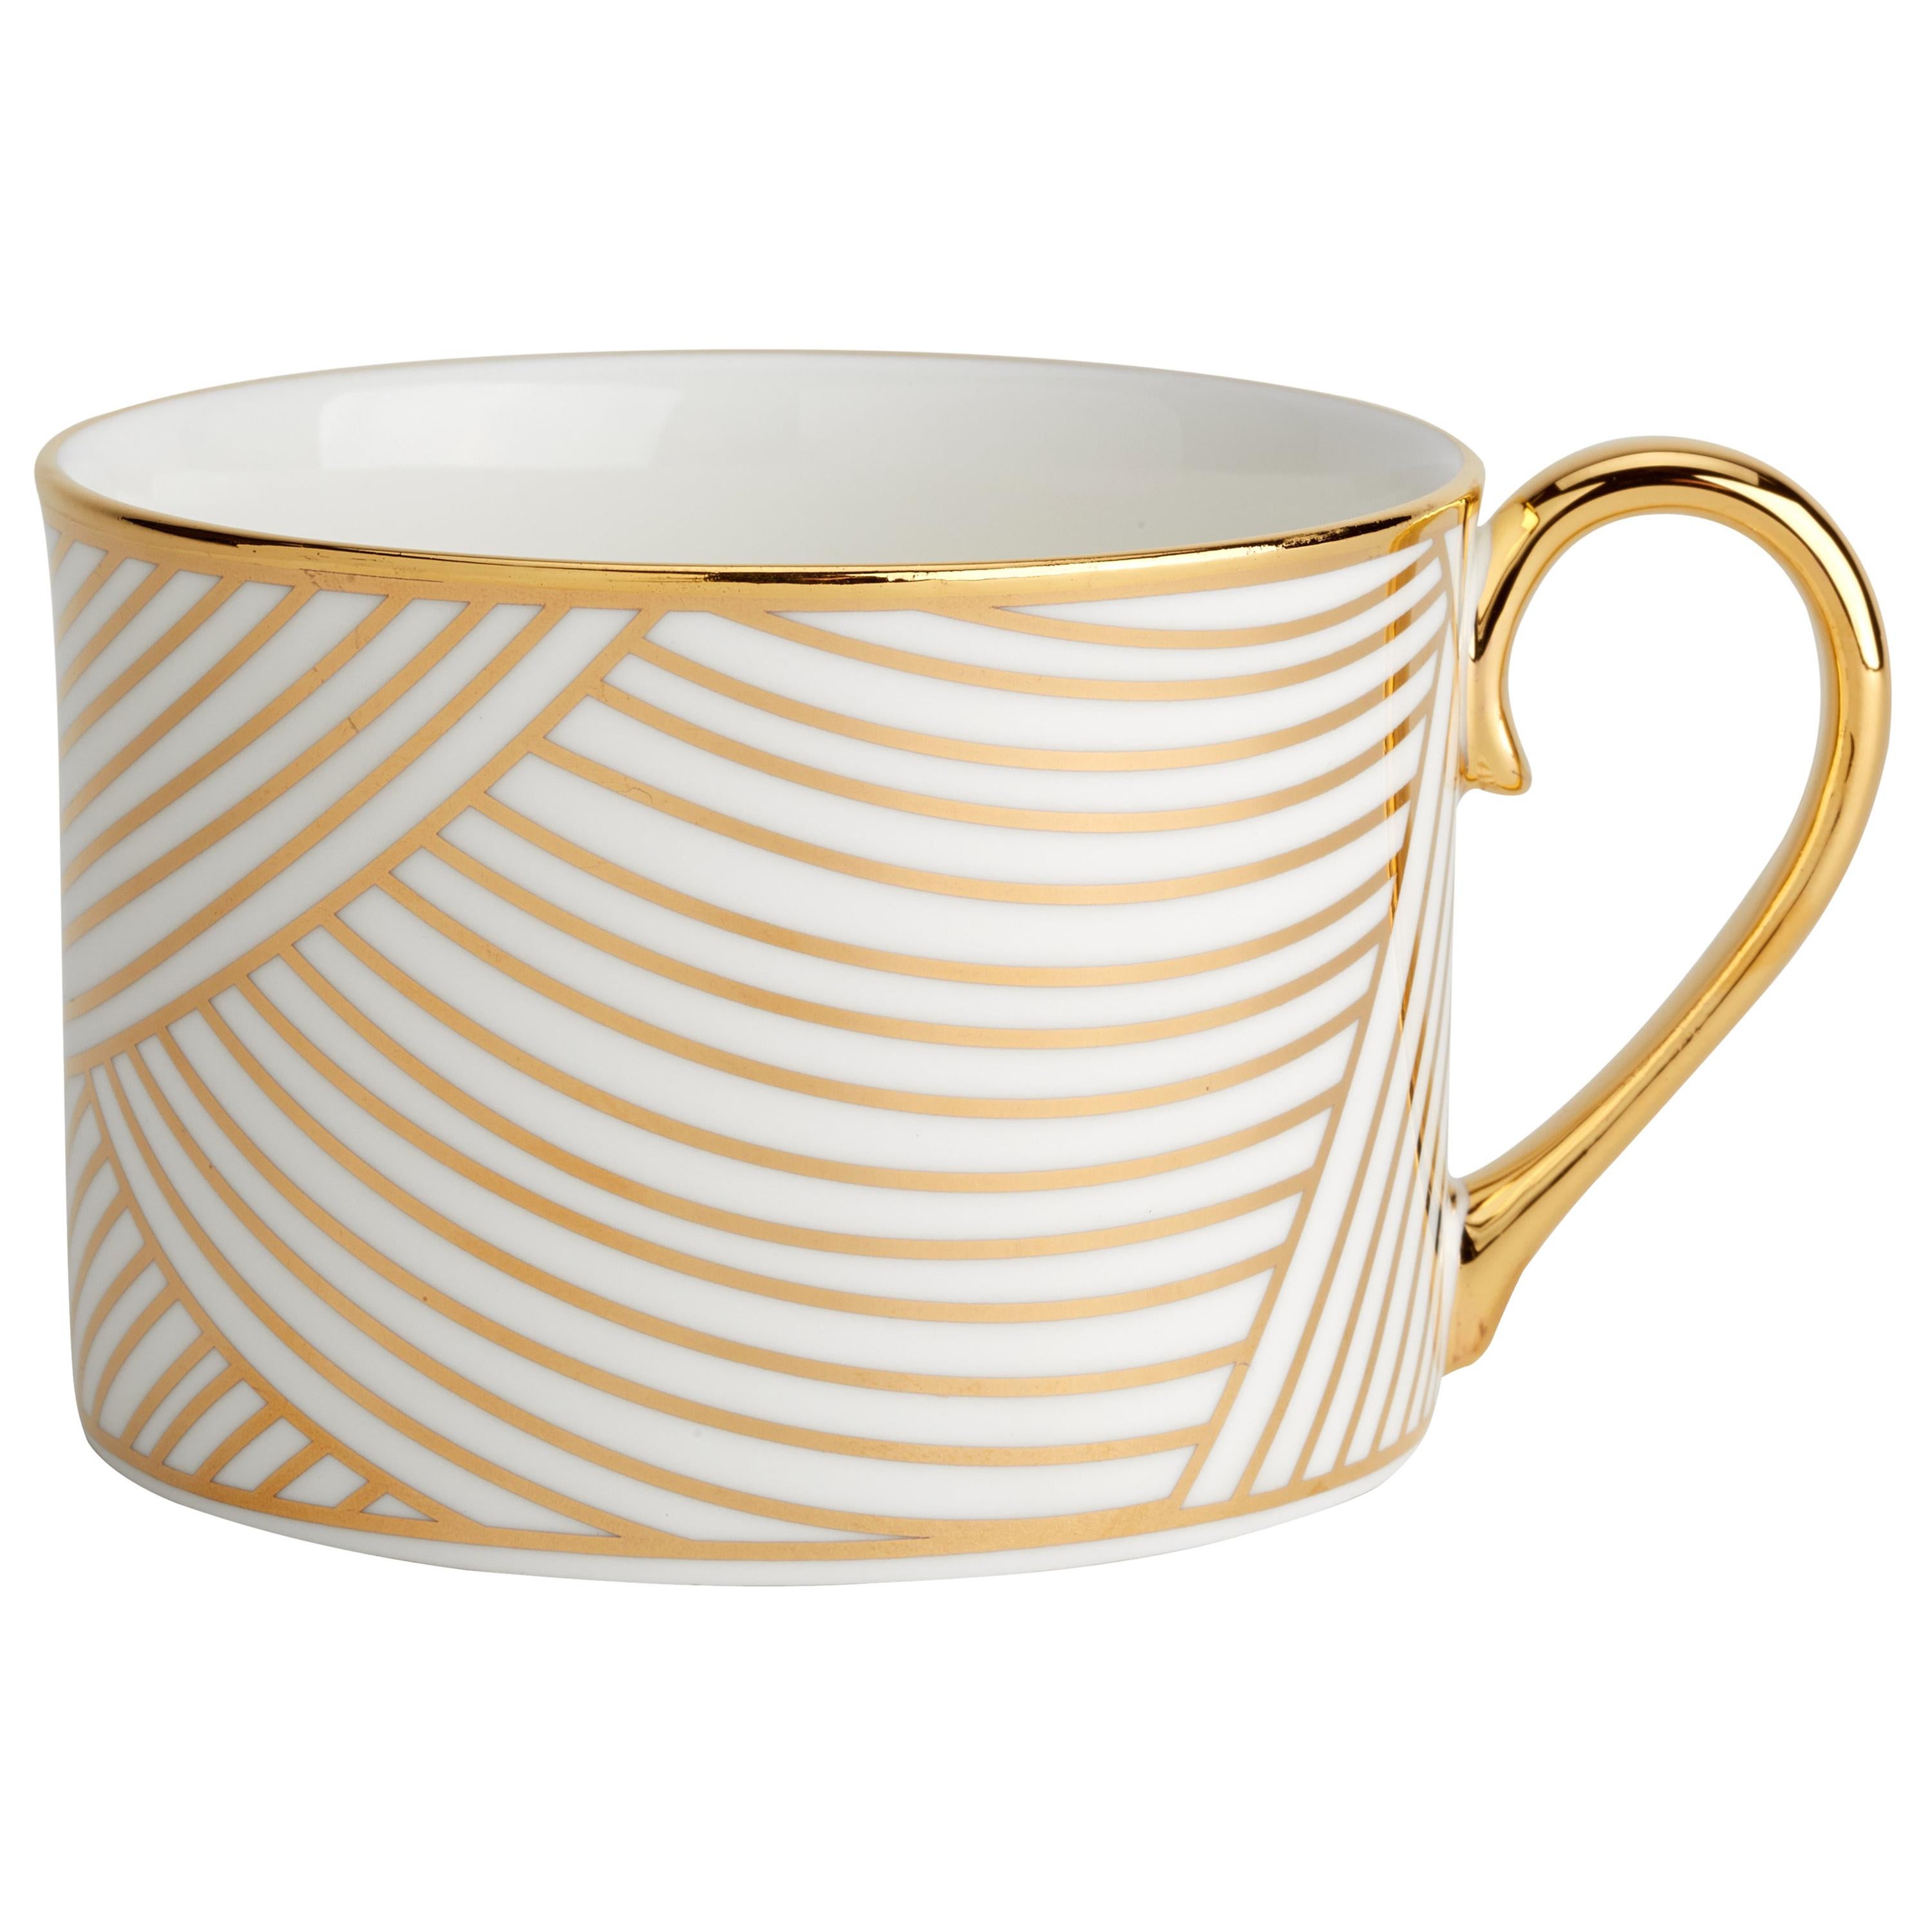 Fine Bone China Coffee Cup with 22-Carat Gold and Black Decals